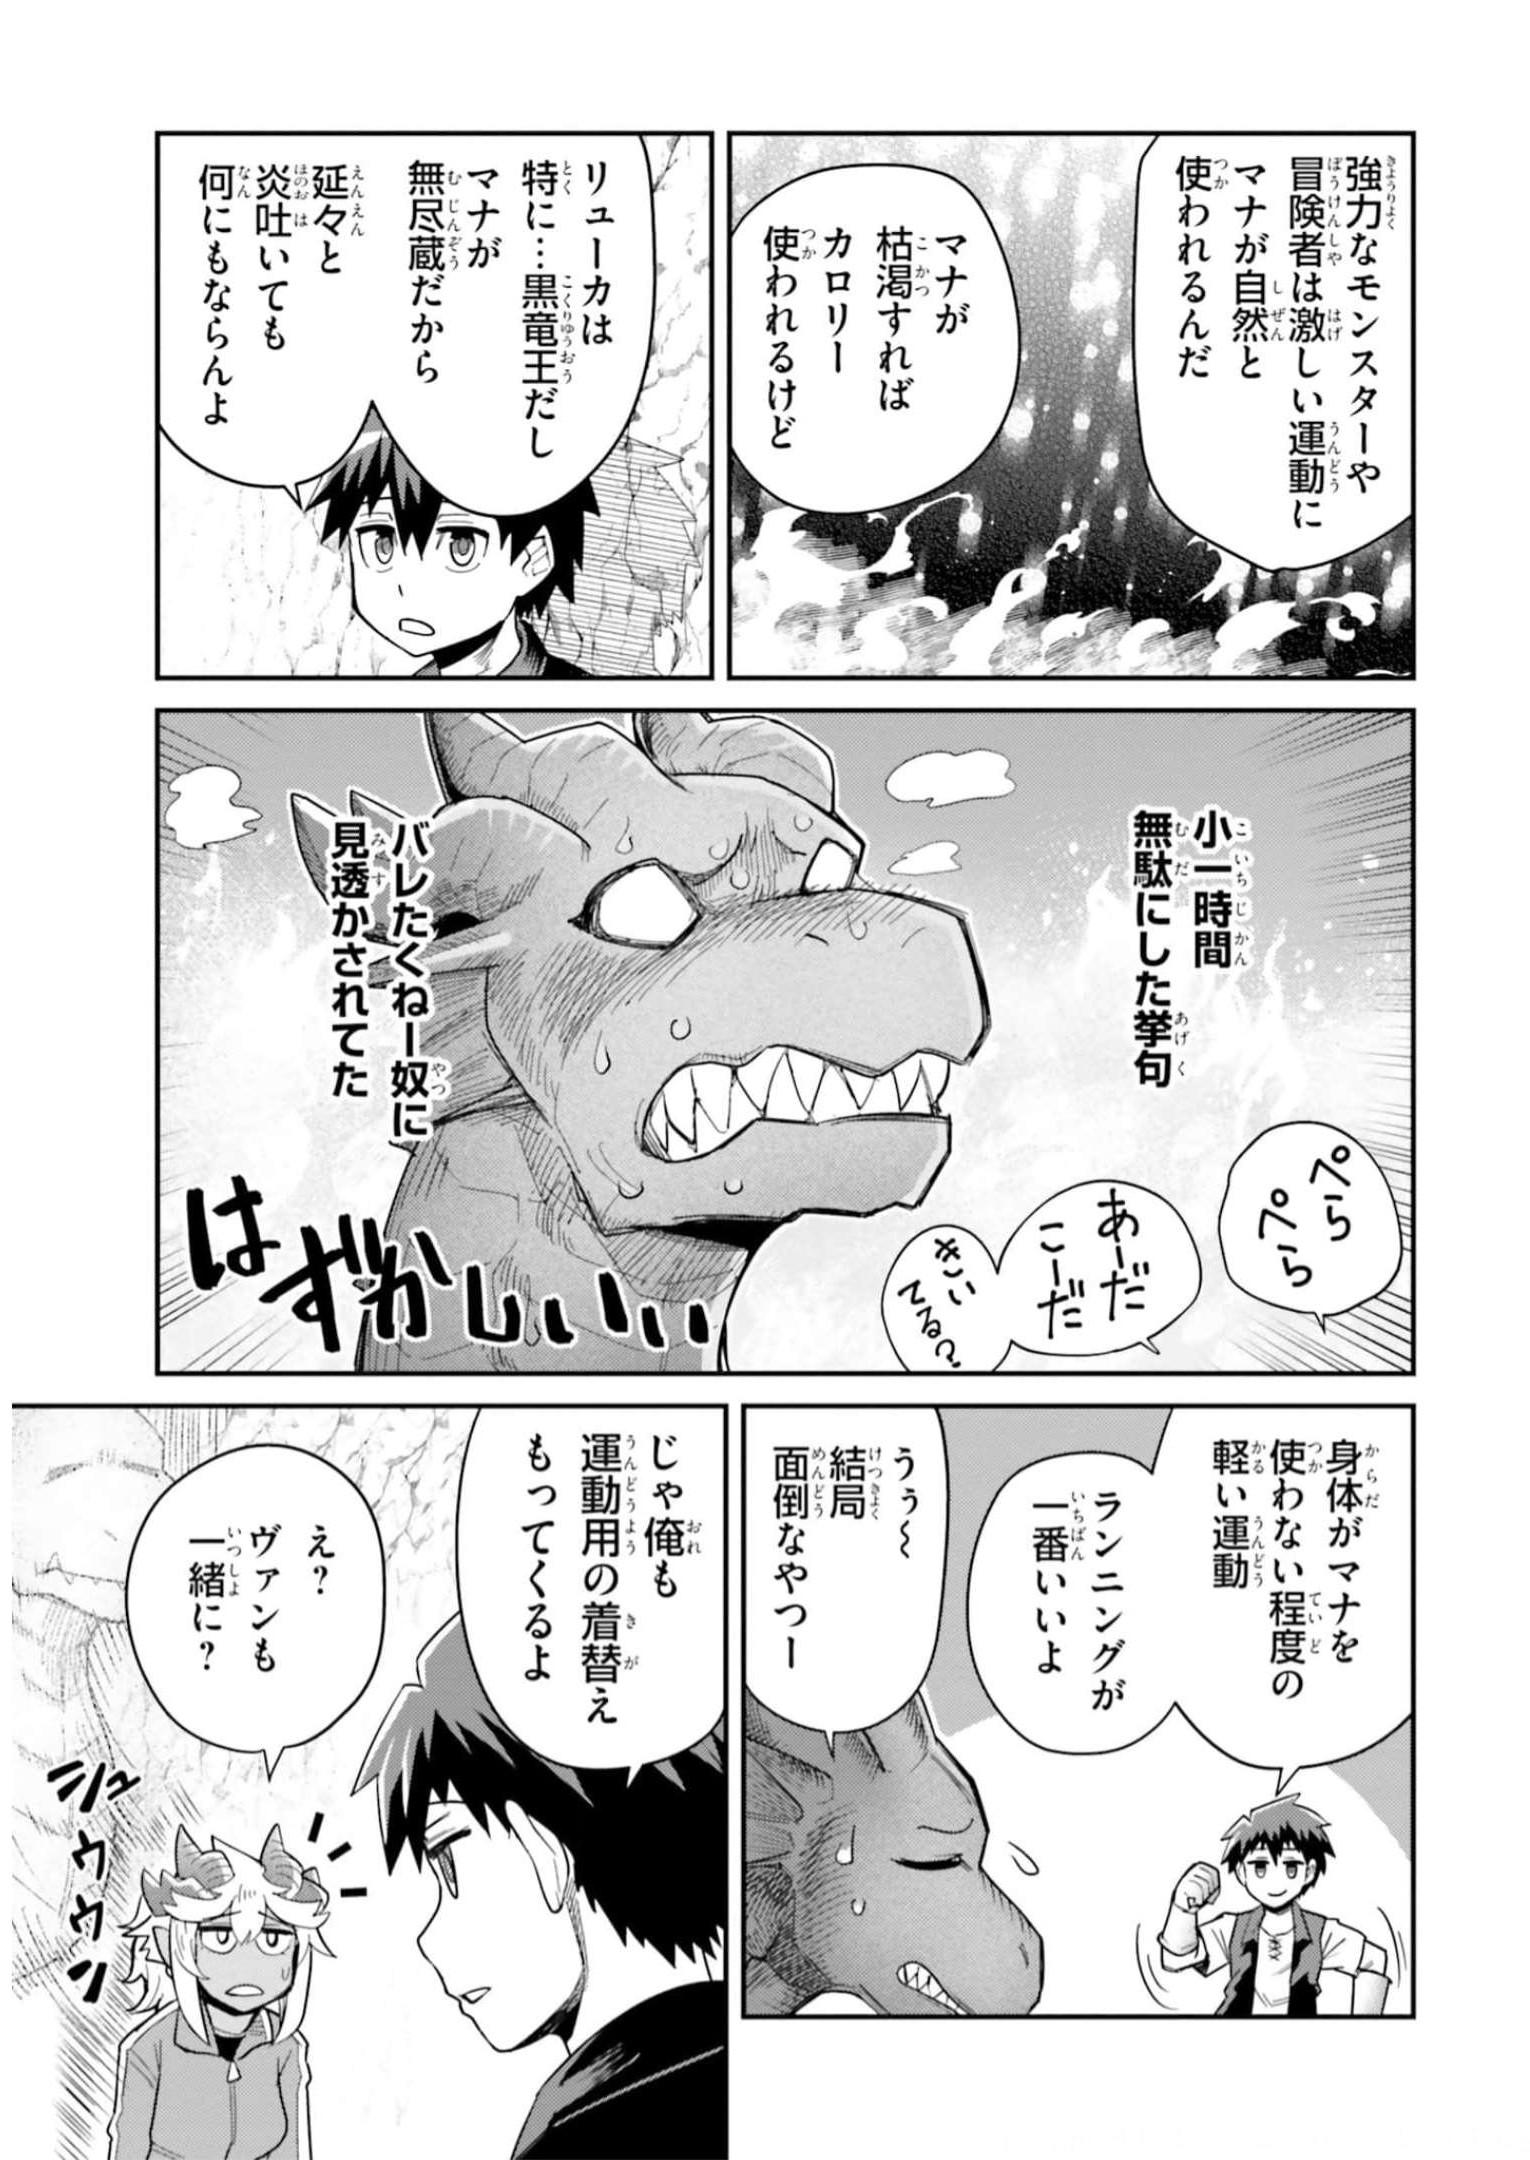 Dungeon Friends Forever Dungeon’s Childhood Friend ダンジョンの幼なじみ 第24話 - Page 13